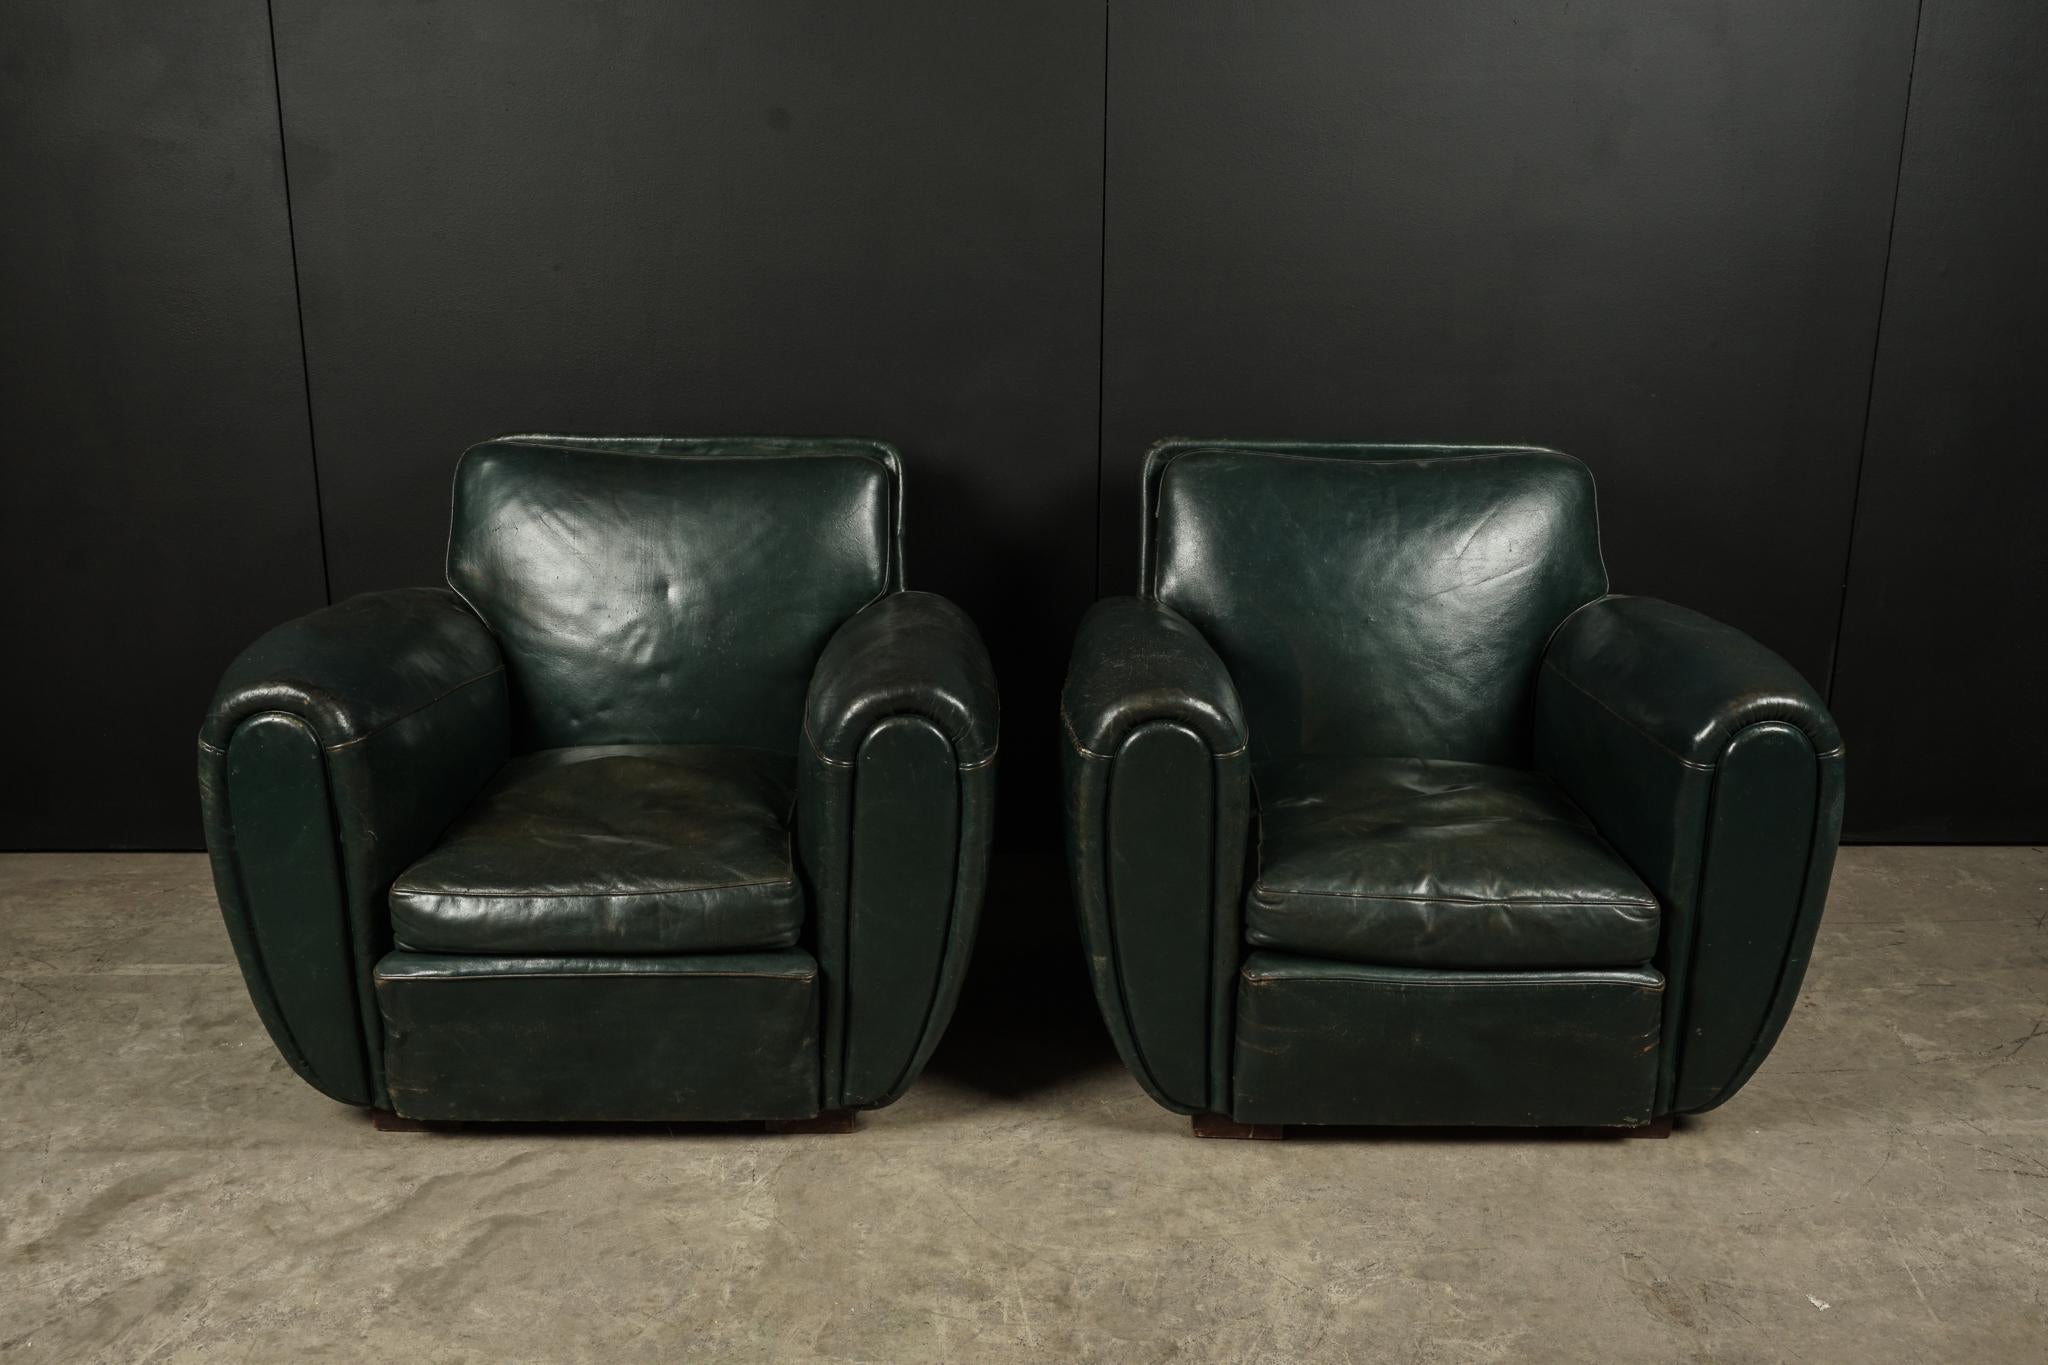 Rare pair of leather club chairs from France, circa 1950. Original green leather upholstery with studded nail heads on back. Early deco model with large curved arms.